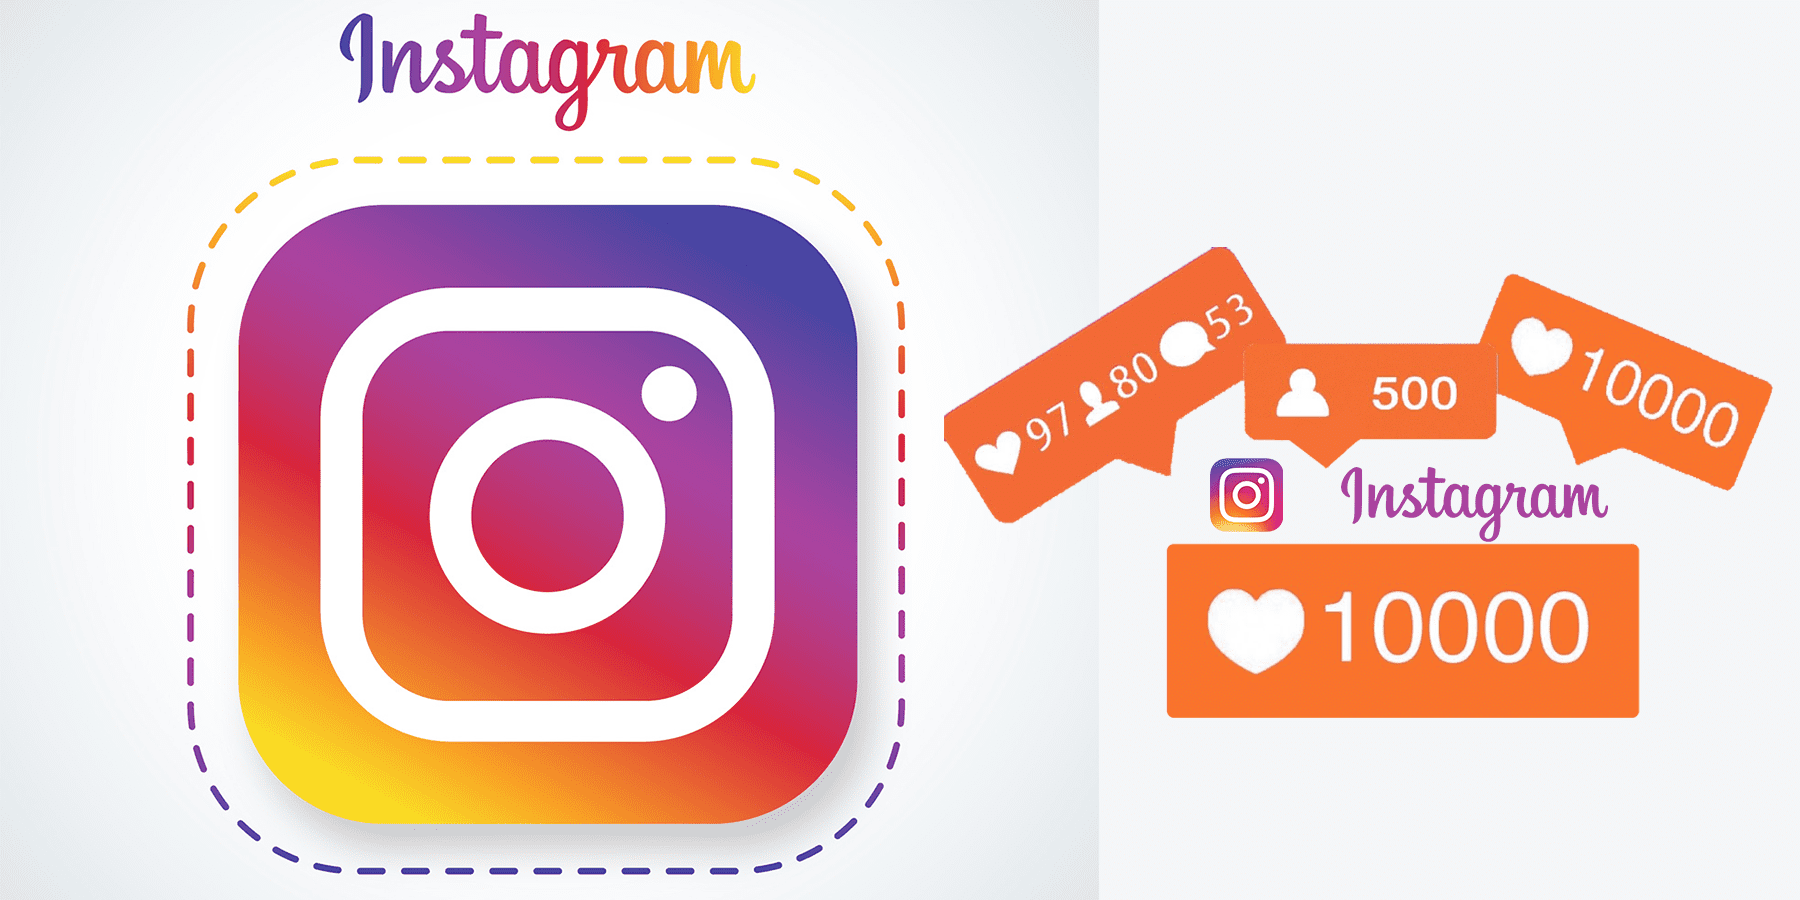 How to Buy Instagram Followers – Highest Quality Followers Starting at $15